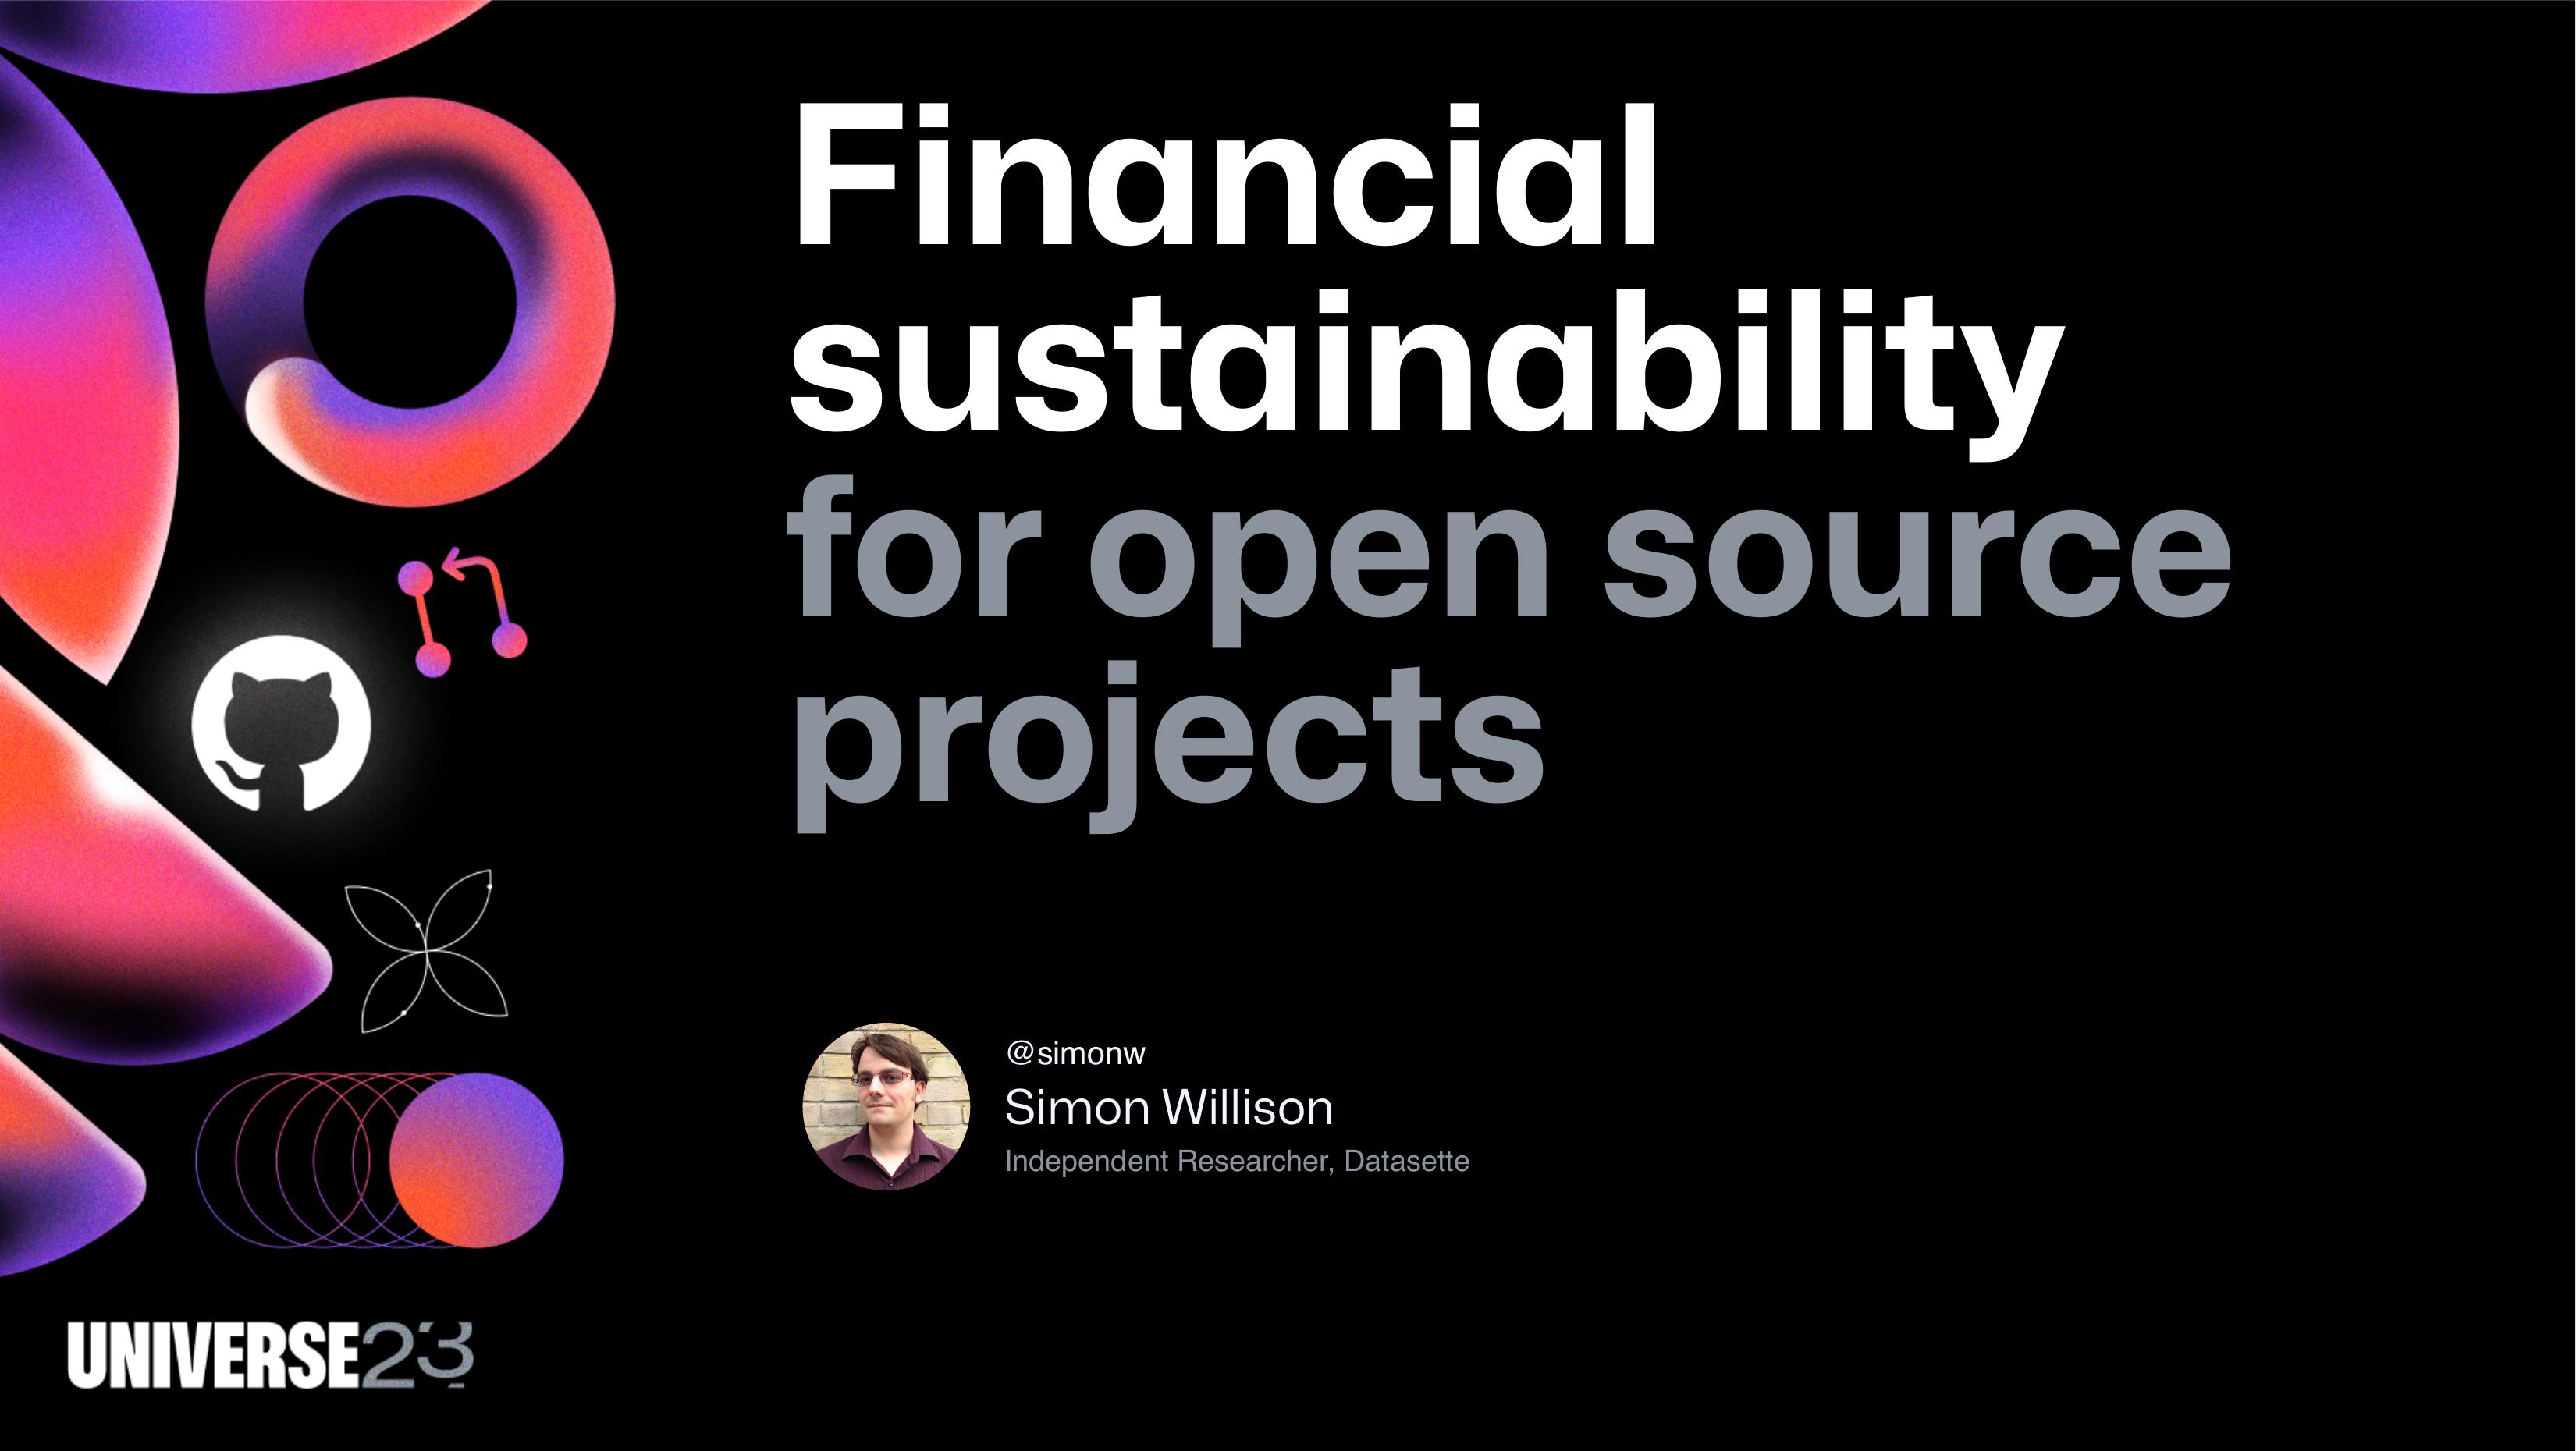 Financial sustainability for open source projects  @simonw Simon Willison Independent researcher, Datasette  Universe 23